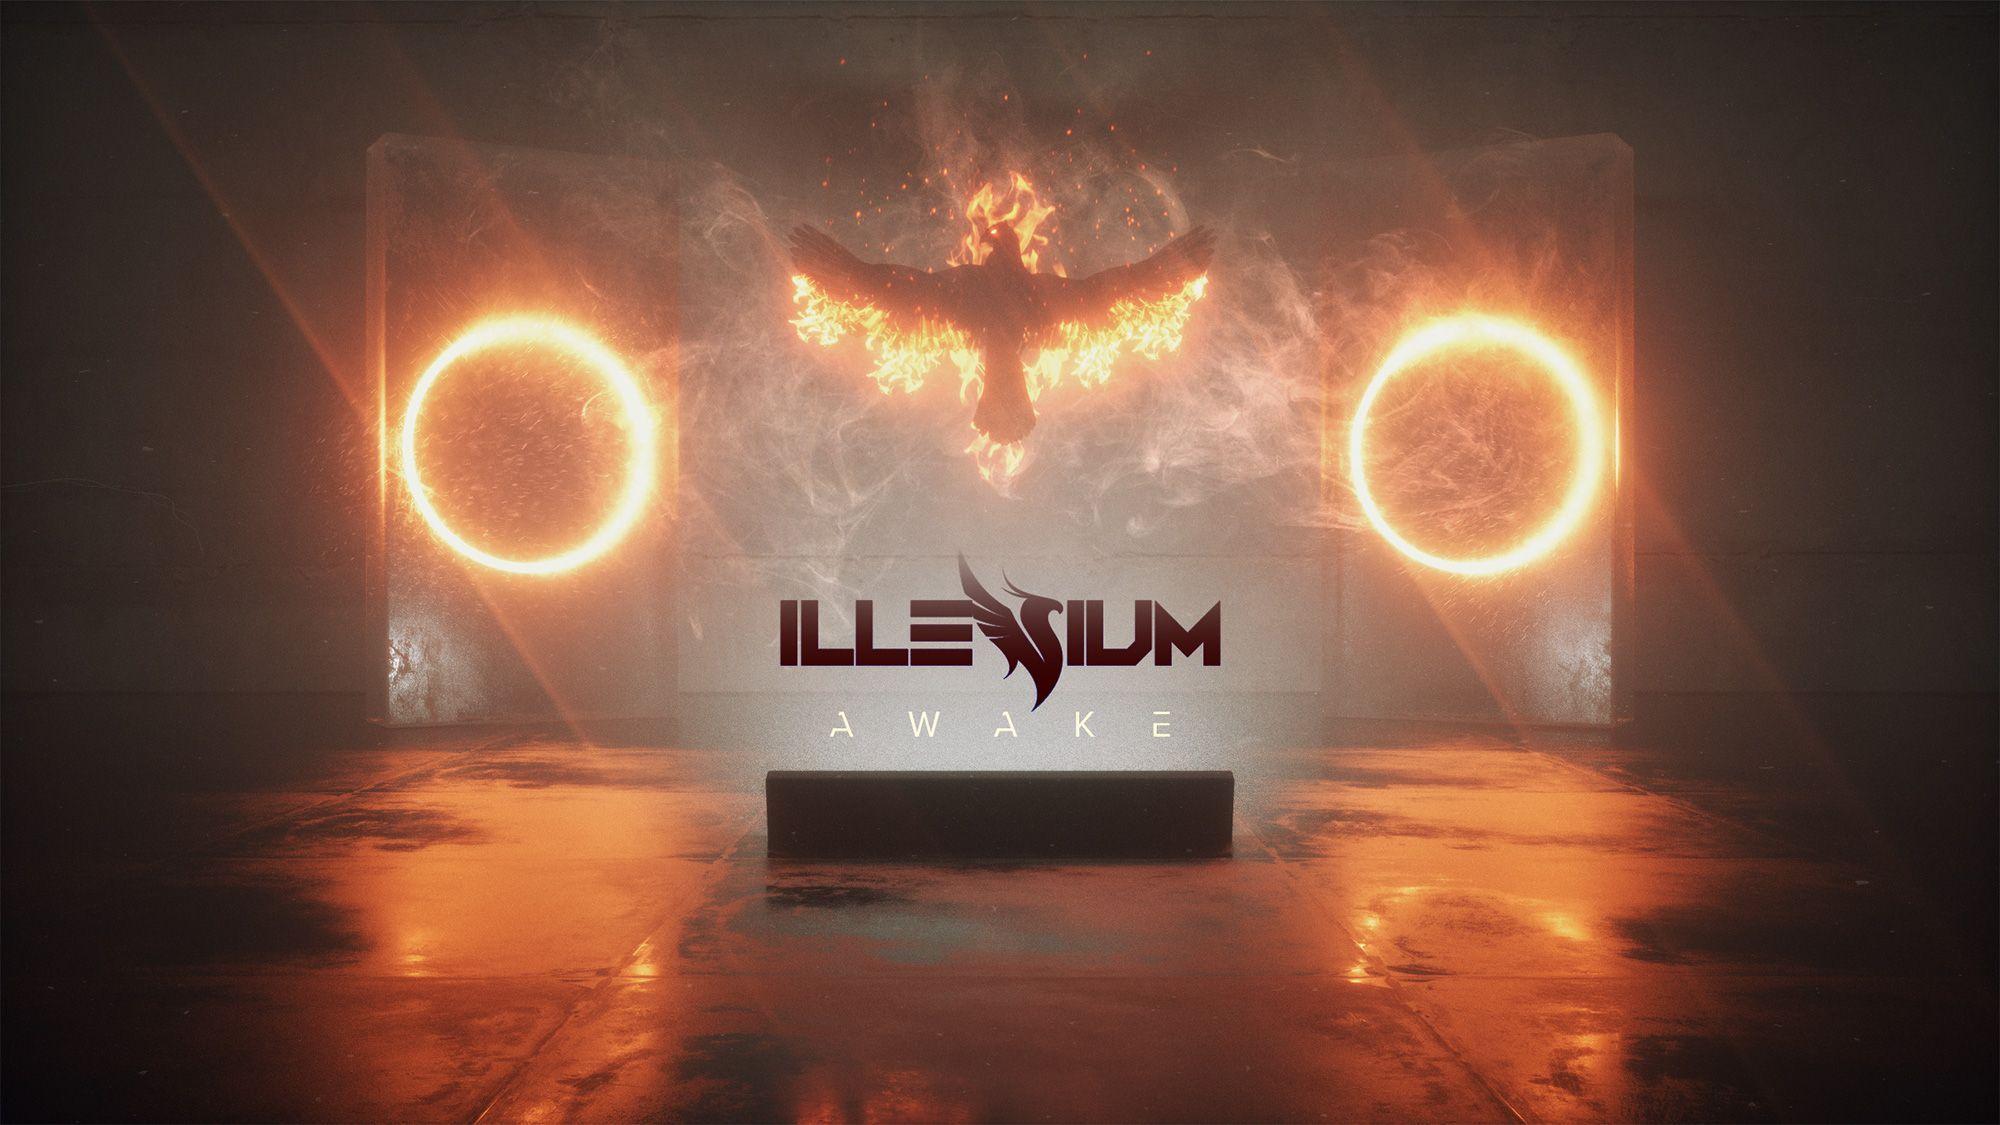 Featured image of post Illenium Wallpaper 1920X1080 Download 1080 1920 wallpapers hd beautiful and cool high quality background images collection for your device